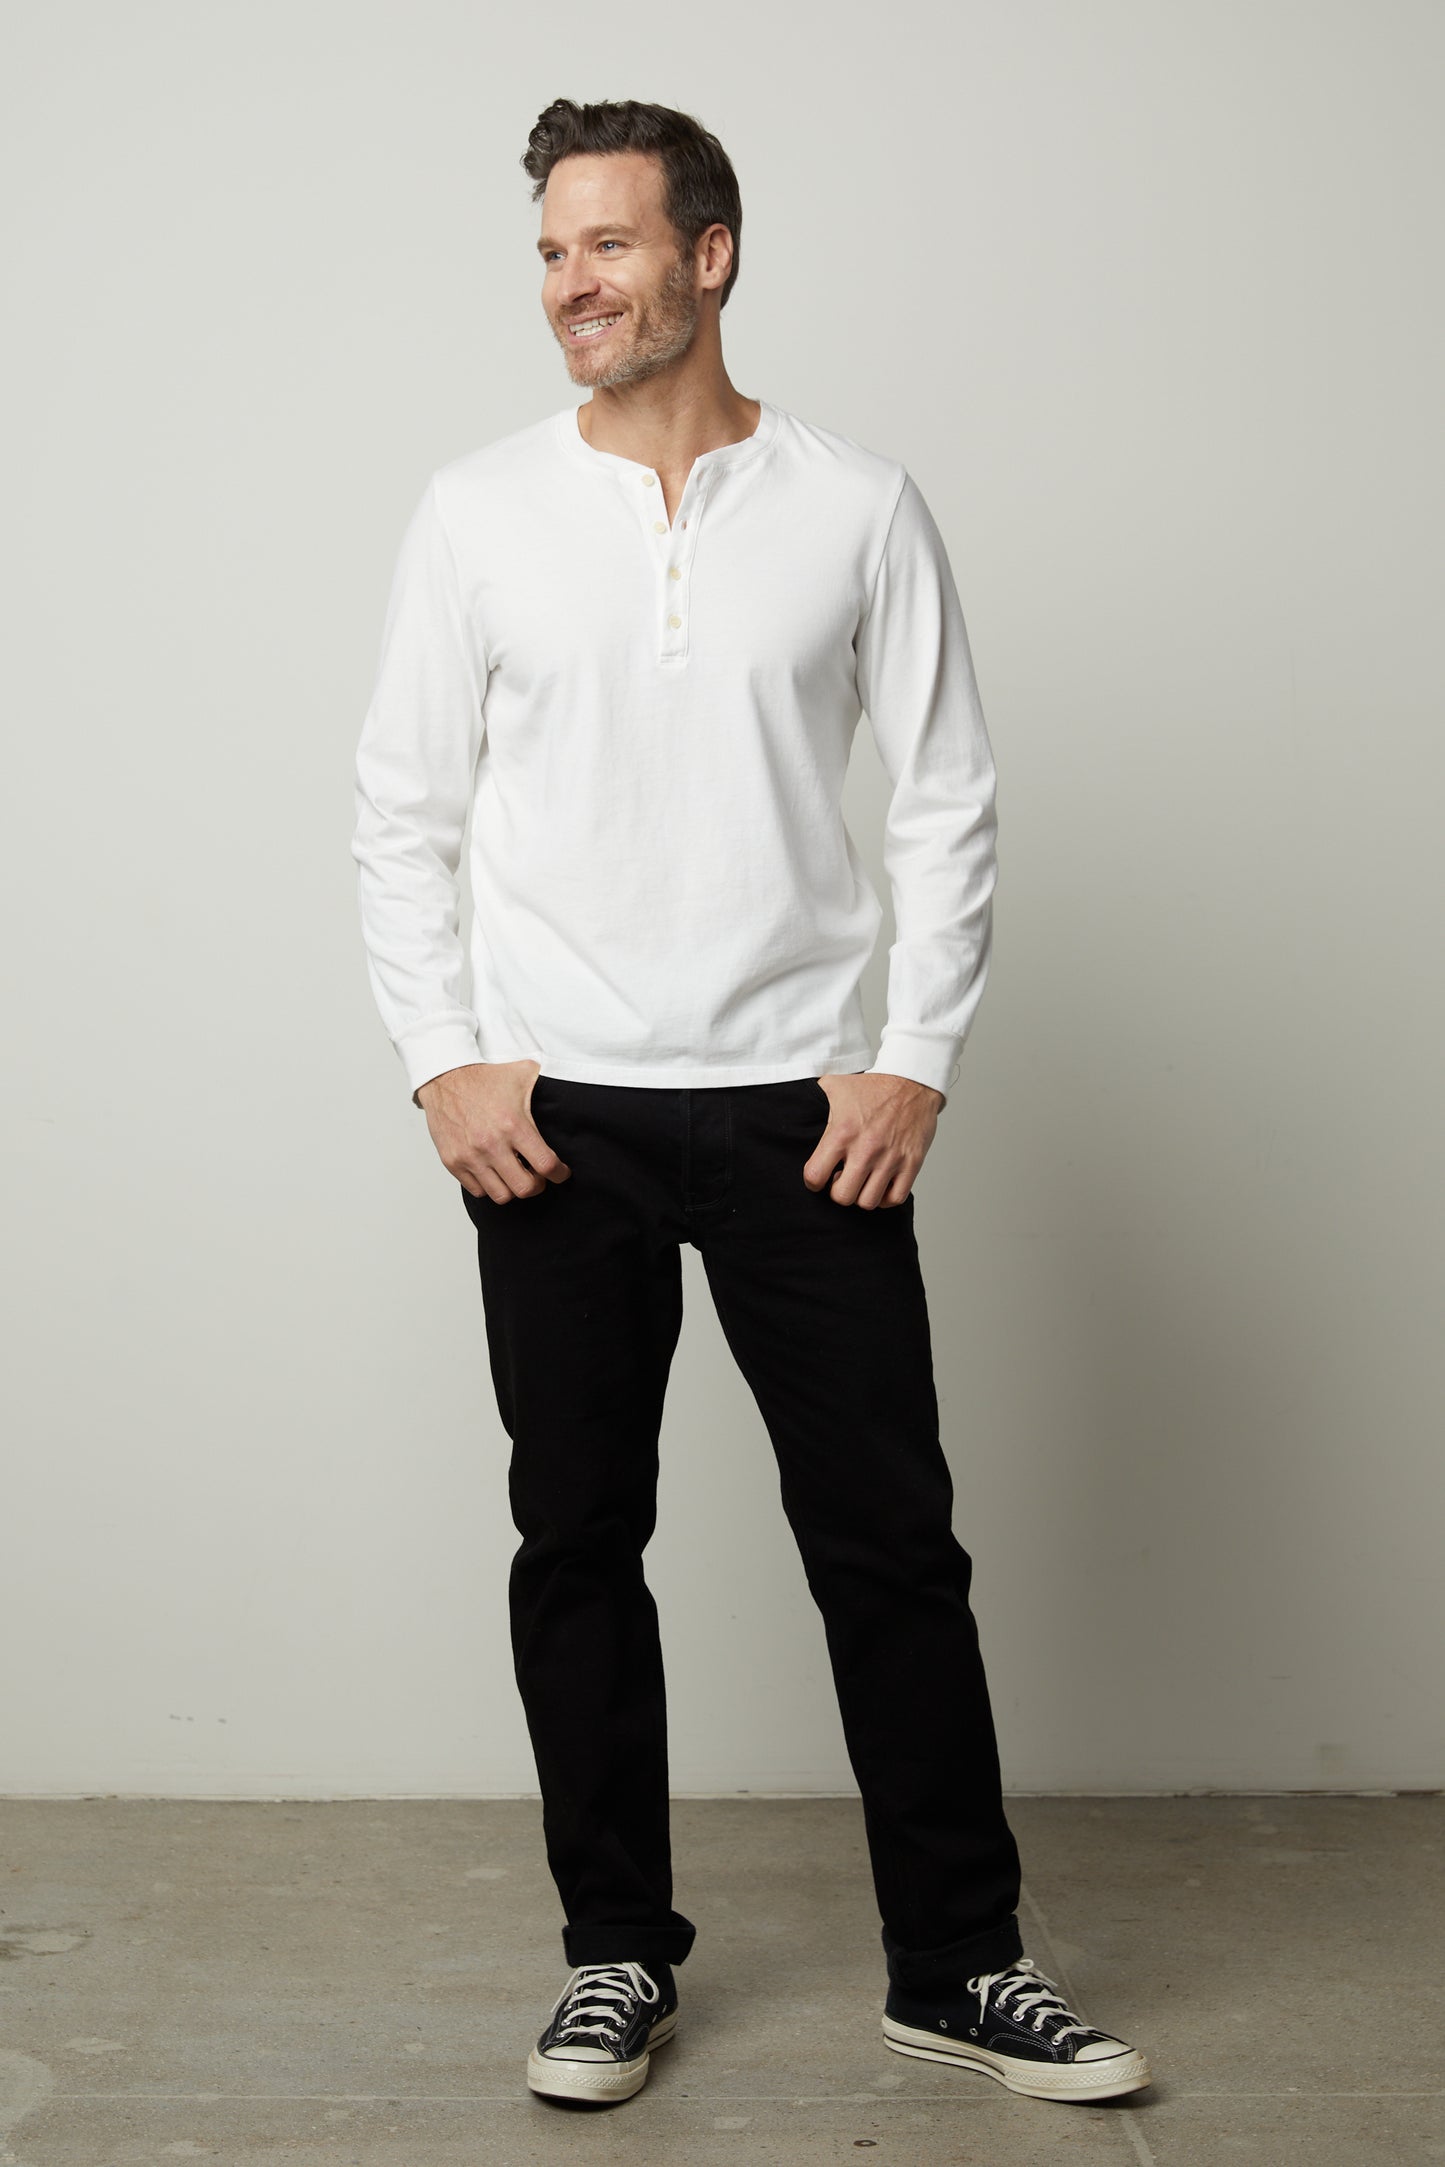 A man wearing a white Velvet by Graham & Spencer REMI HENLEY shirt and black pants.-26846369448129